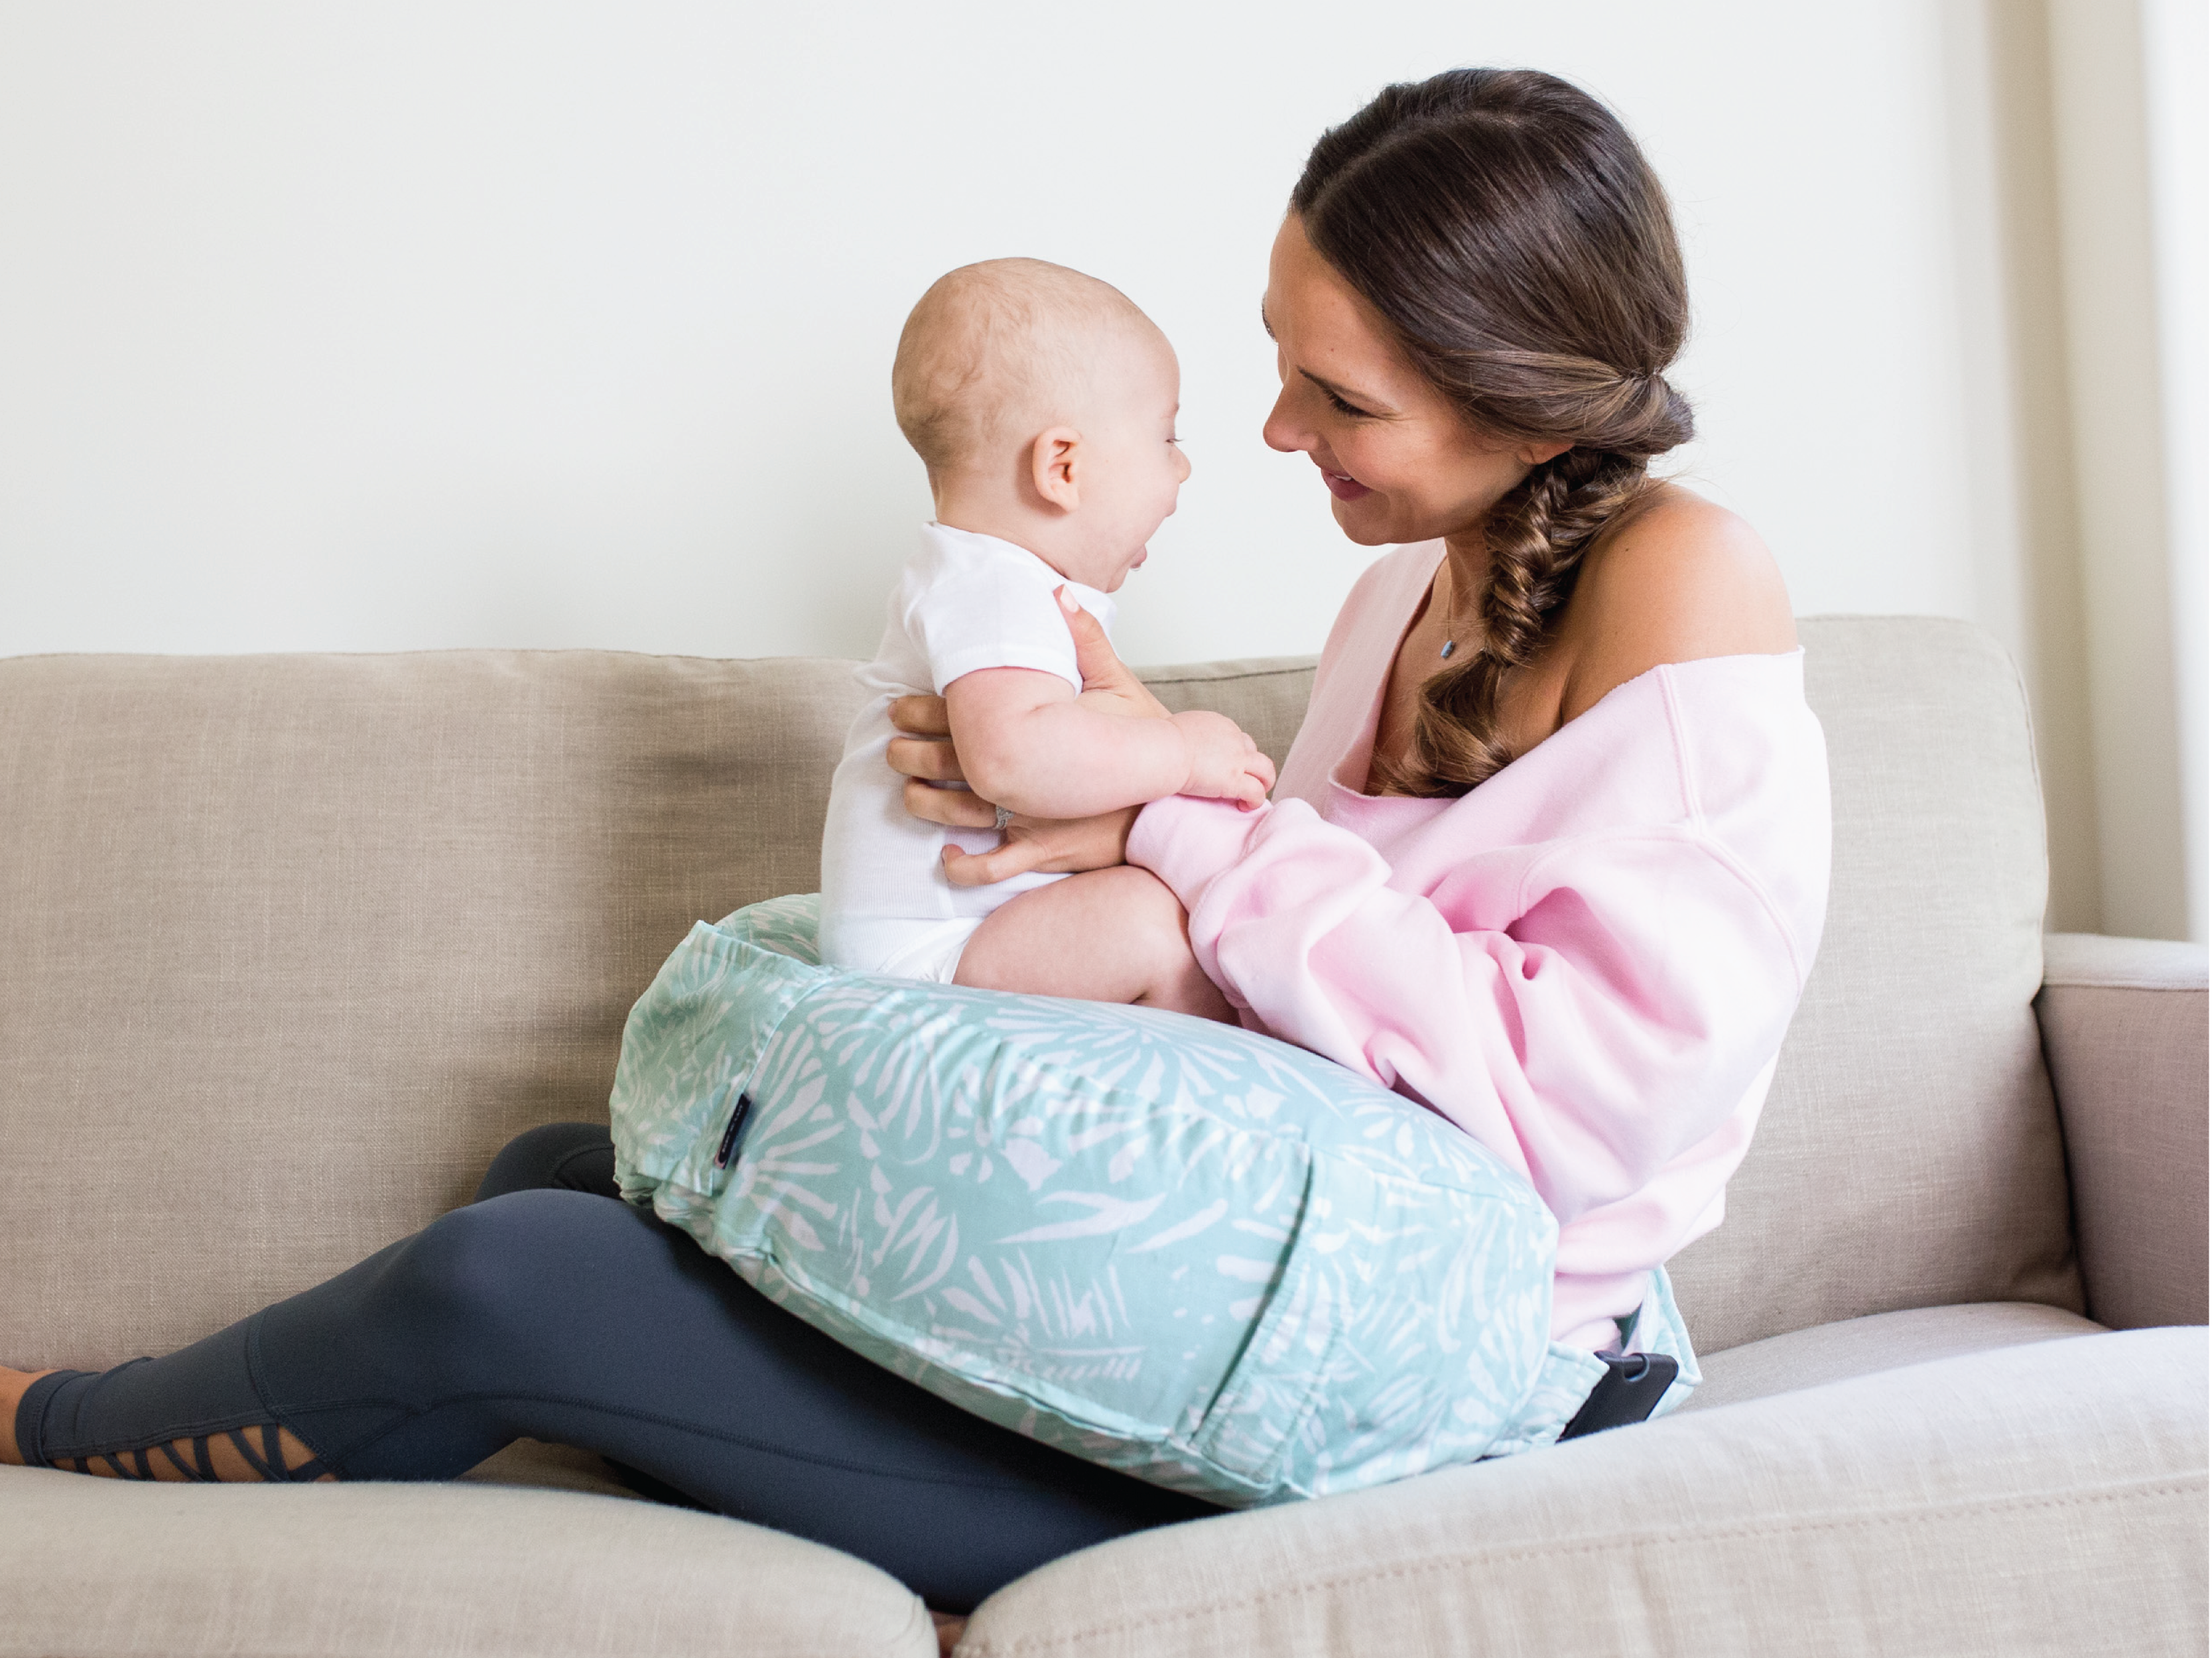 Our nursing pillows - comfortable by design for breastfeeding